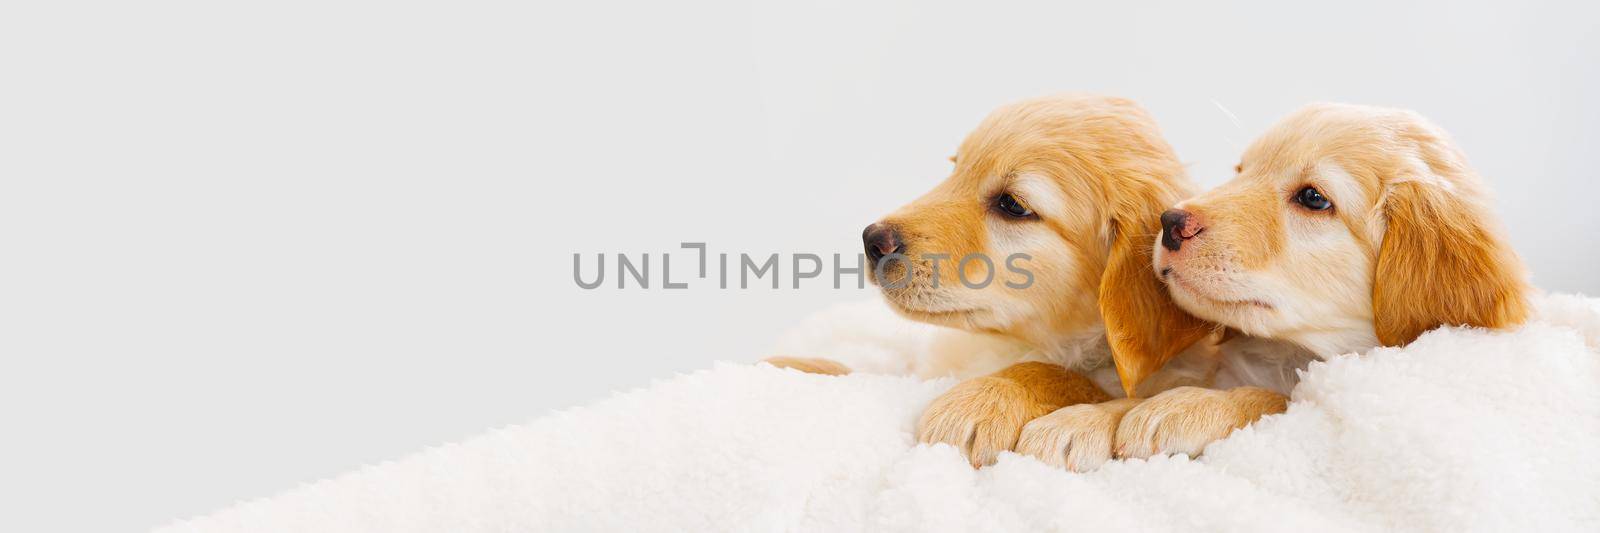 couple of cute puppies play with each other. Hovawart breed. cute and funny young puppy. hovawart and golden retriever puppy